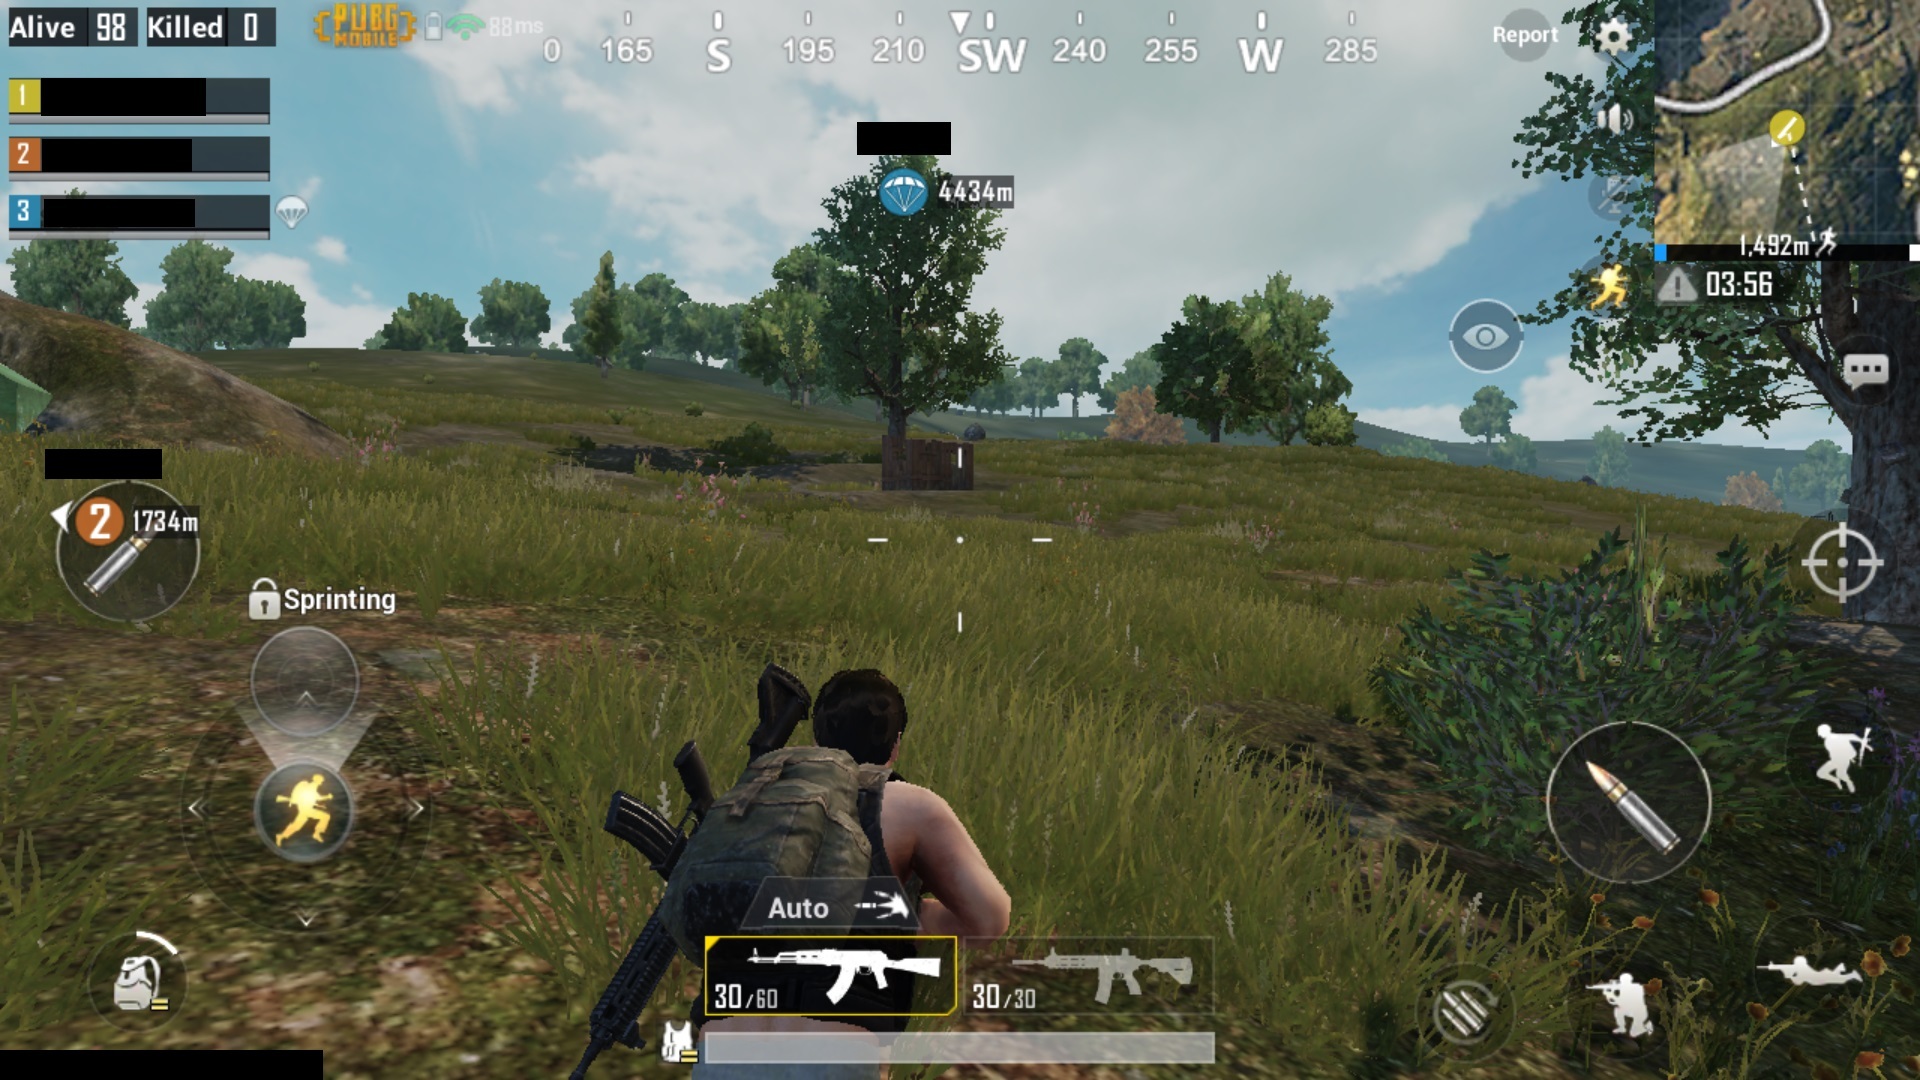 Download failed because the resources could not be found pubg mobile фото 19